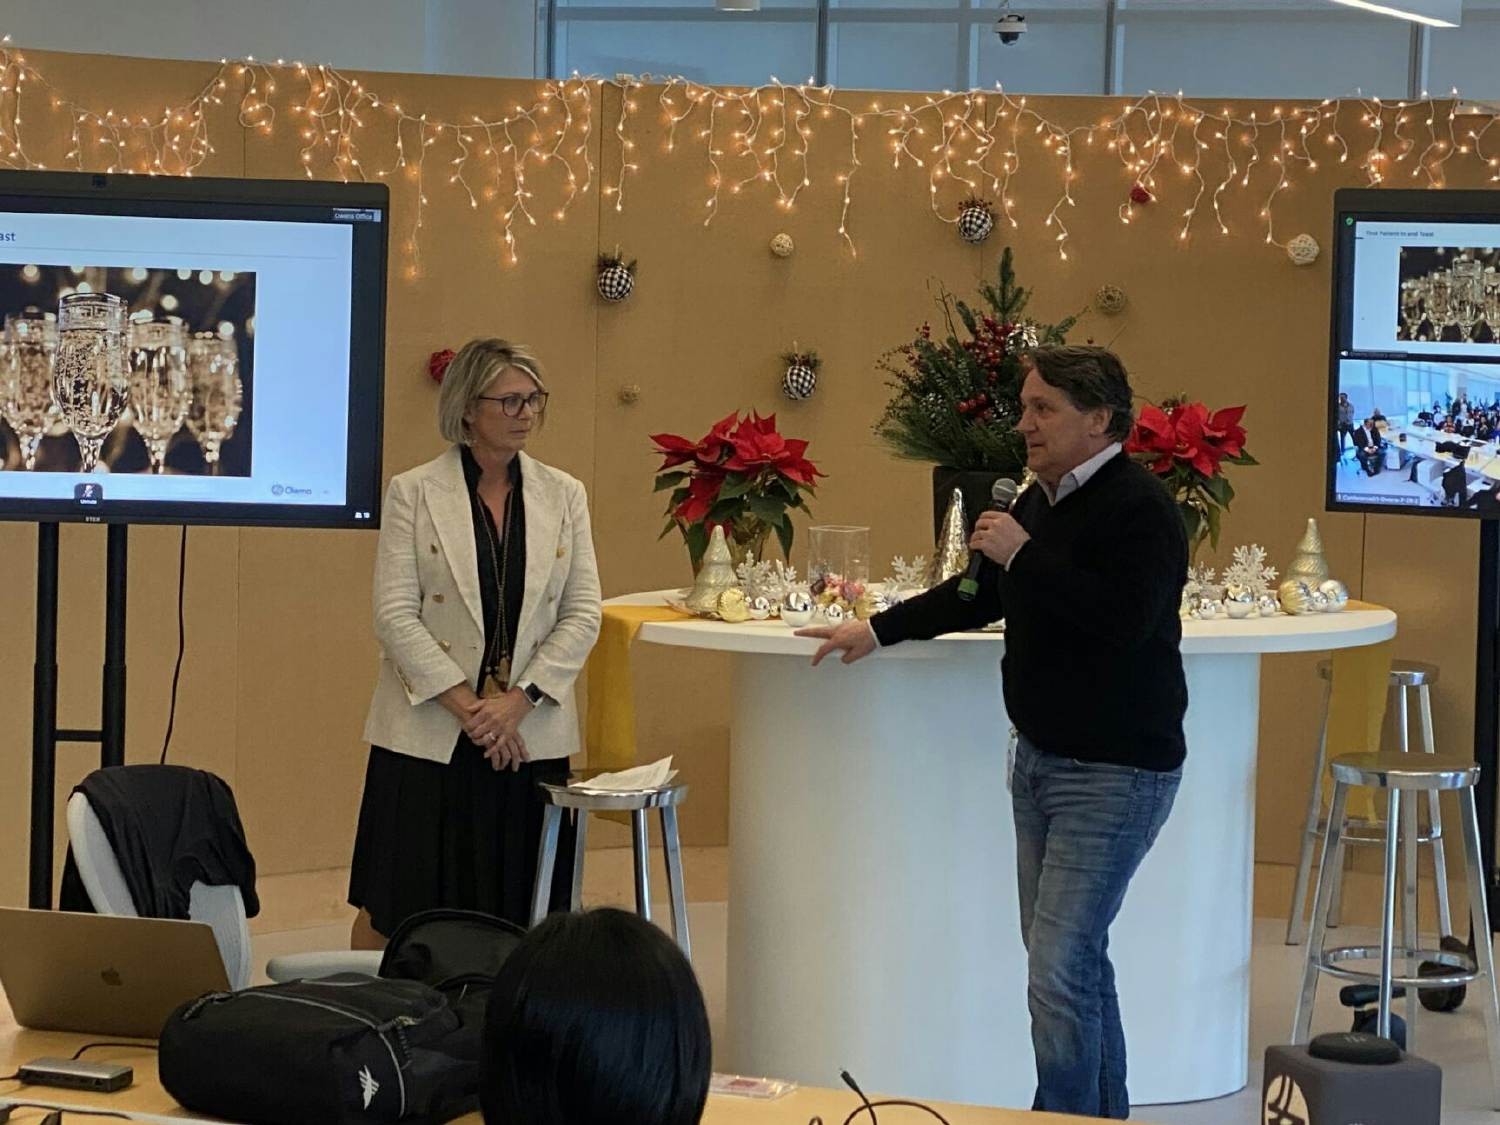 Achievements are Something to Celebrate: Our CEO recognizes a key milestone at Olema and the team who made it possible.